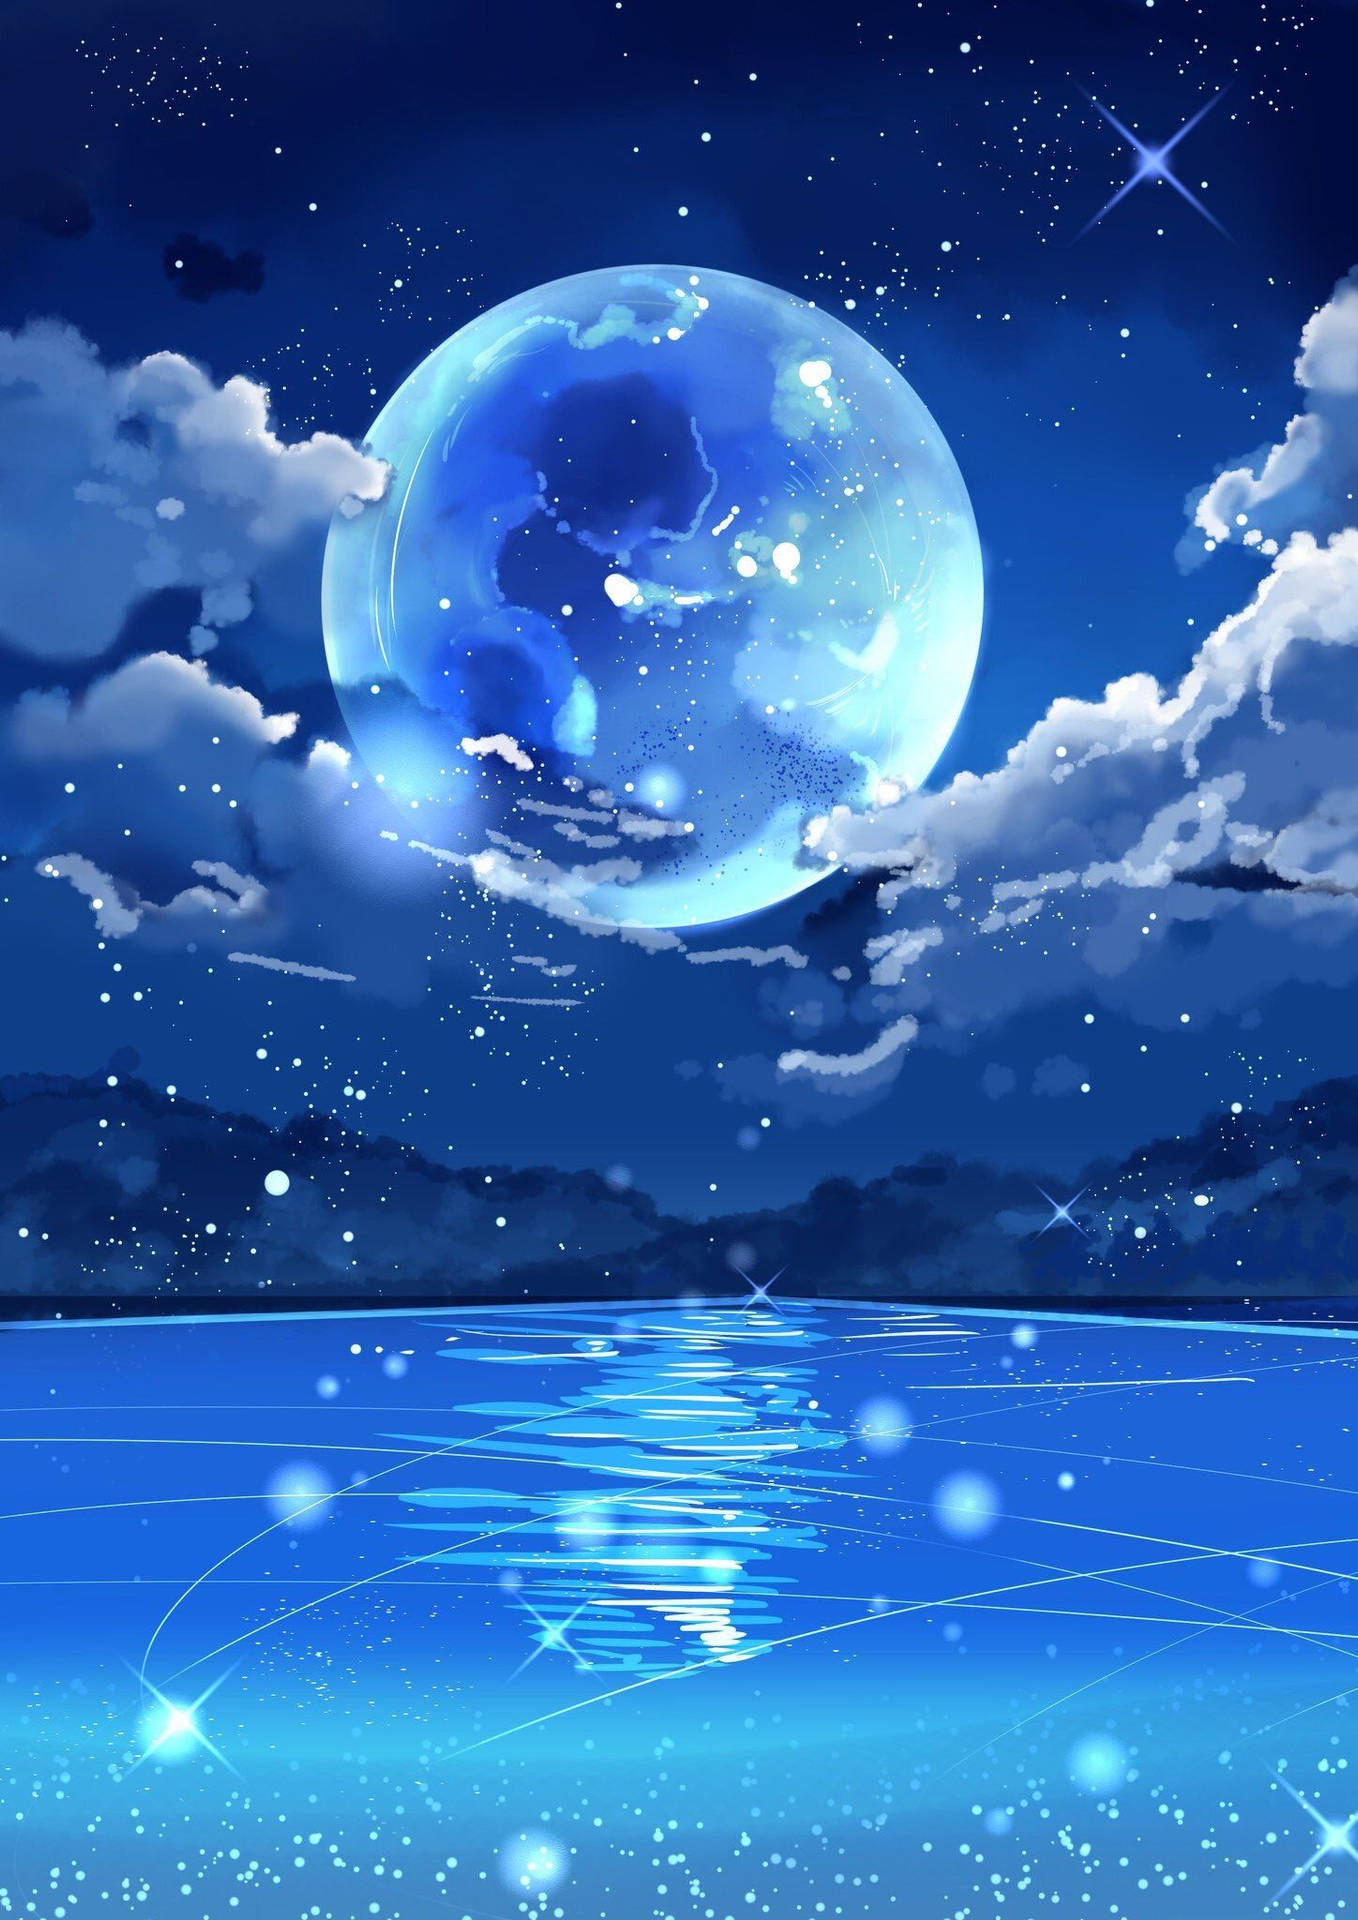 Galaxy Moon Clouds And Ocean Wallpaper